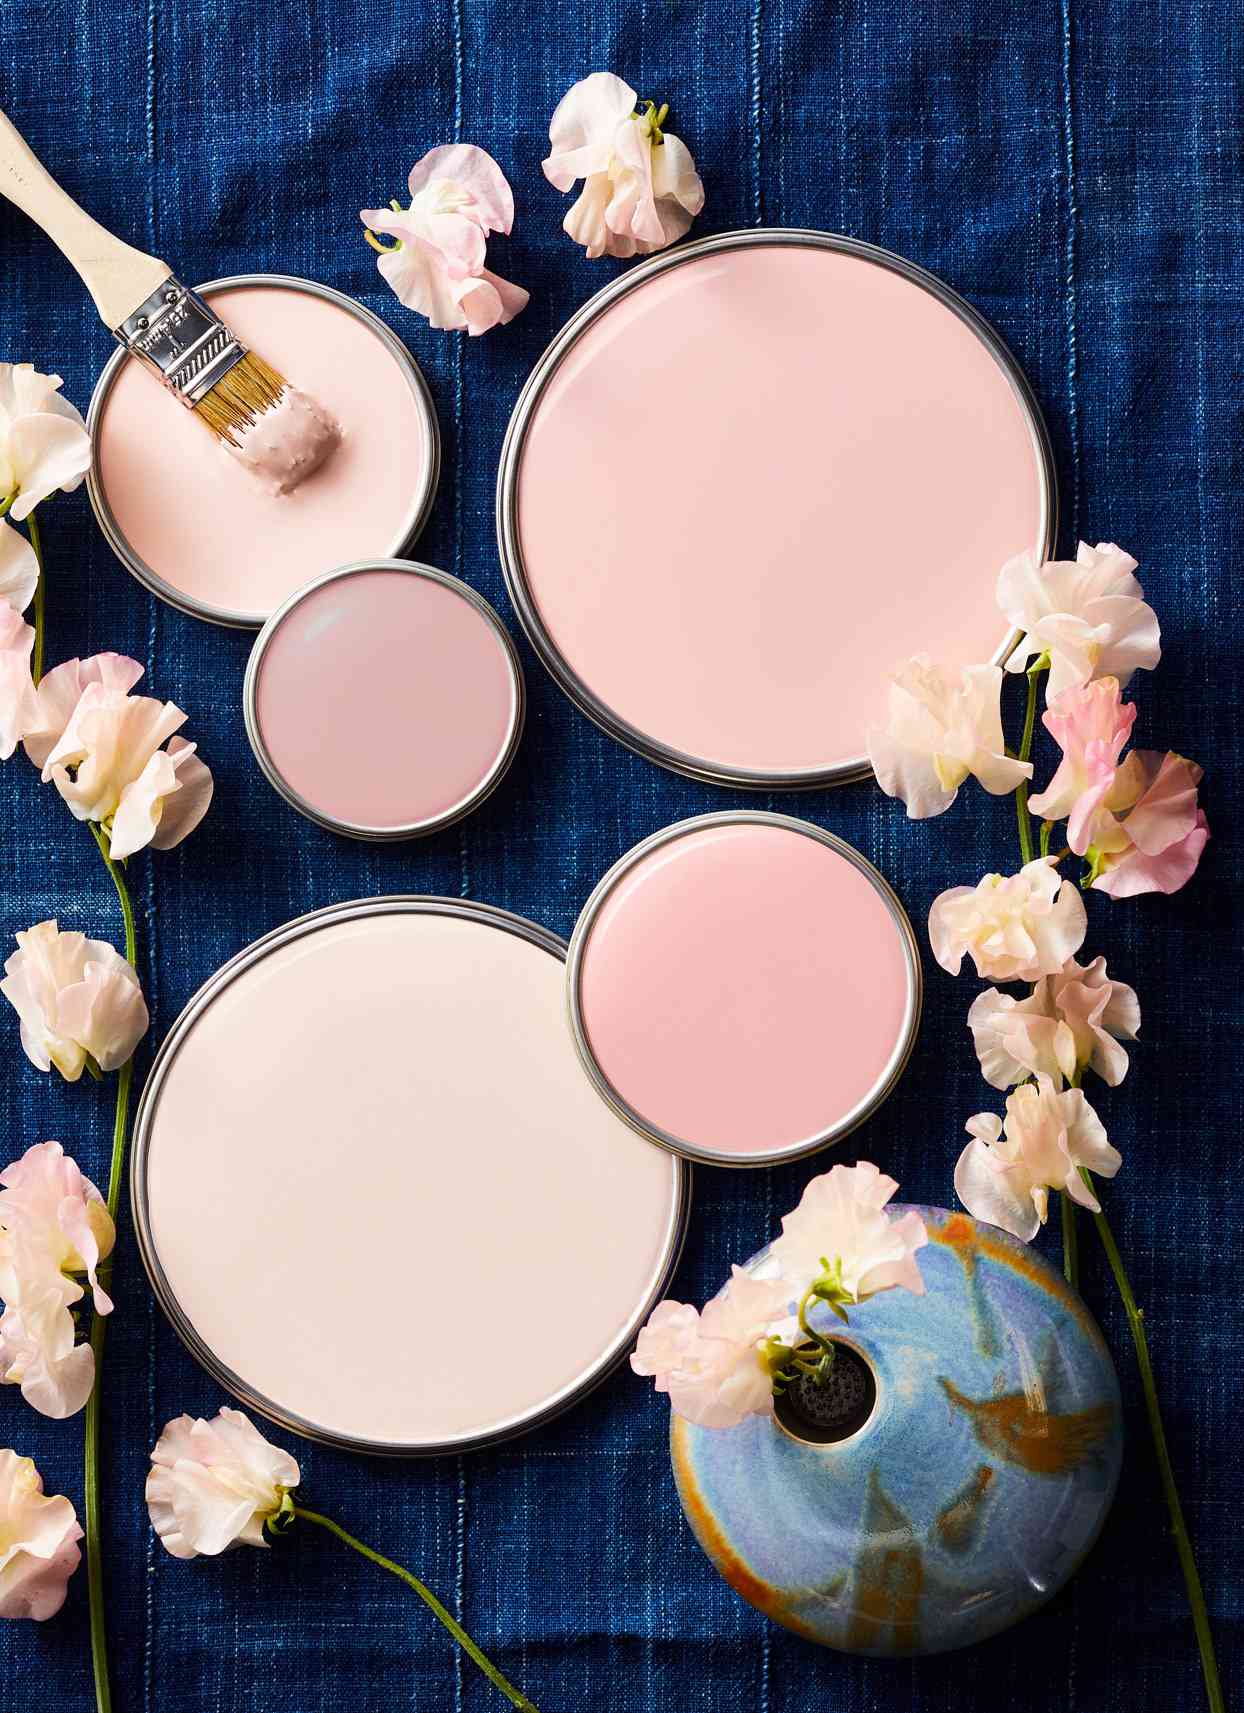 Paint the lid with different blush colors